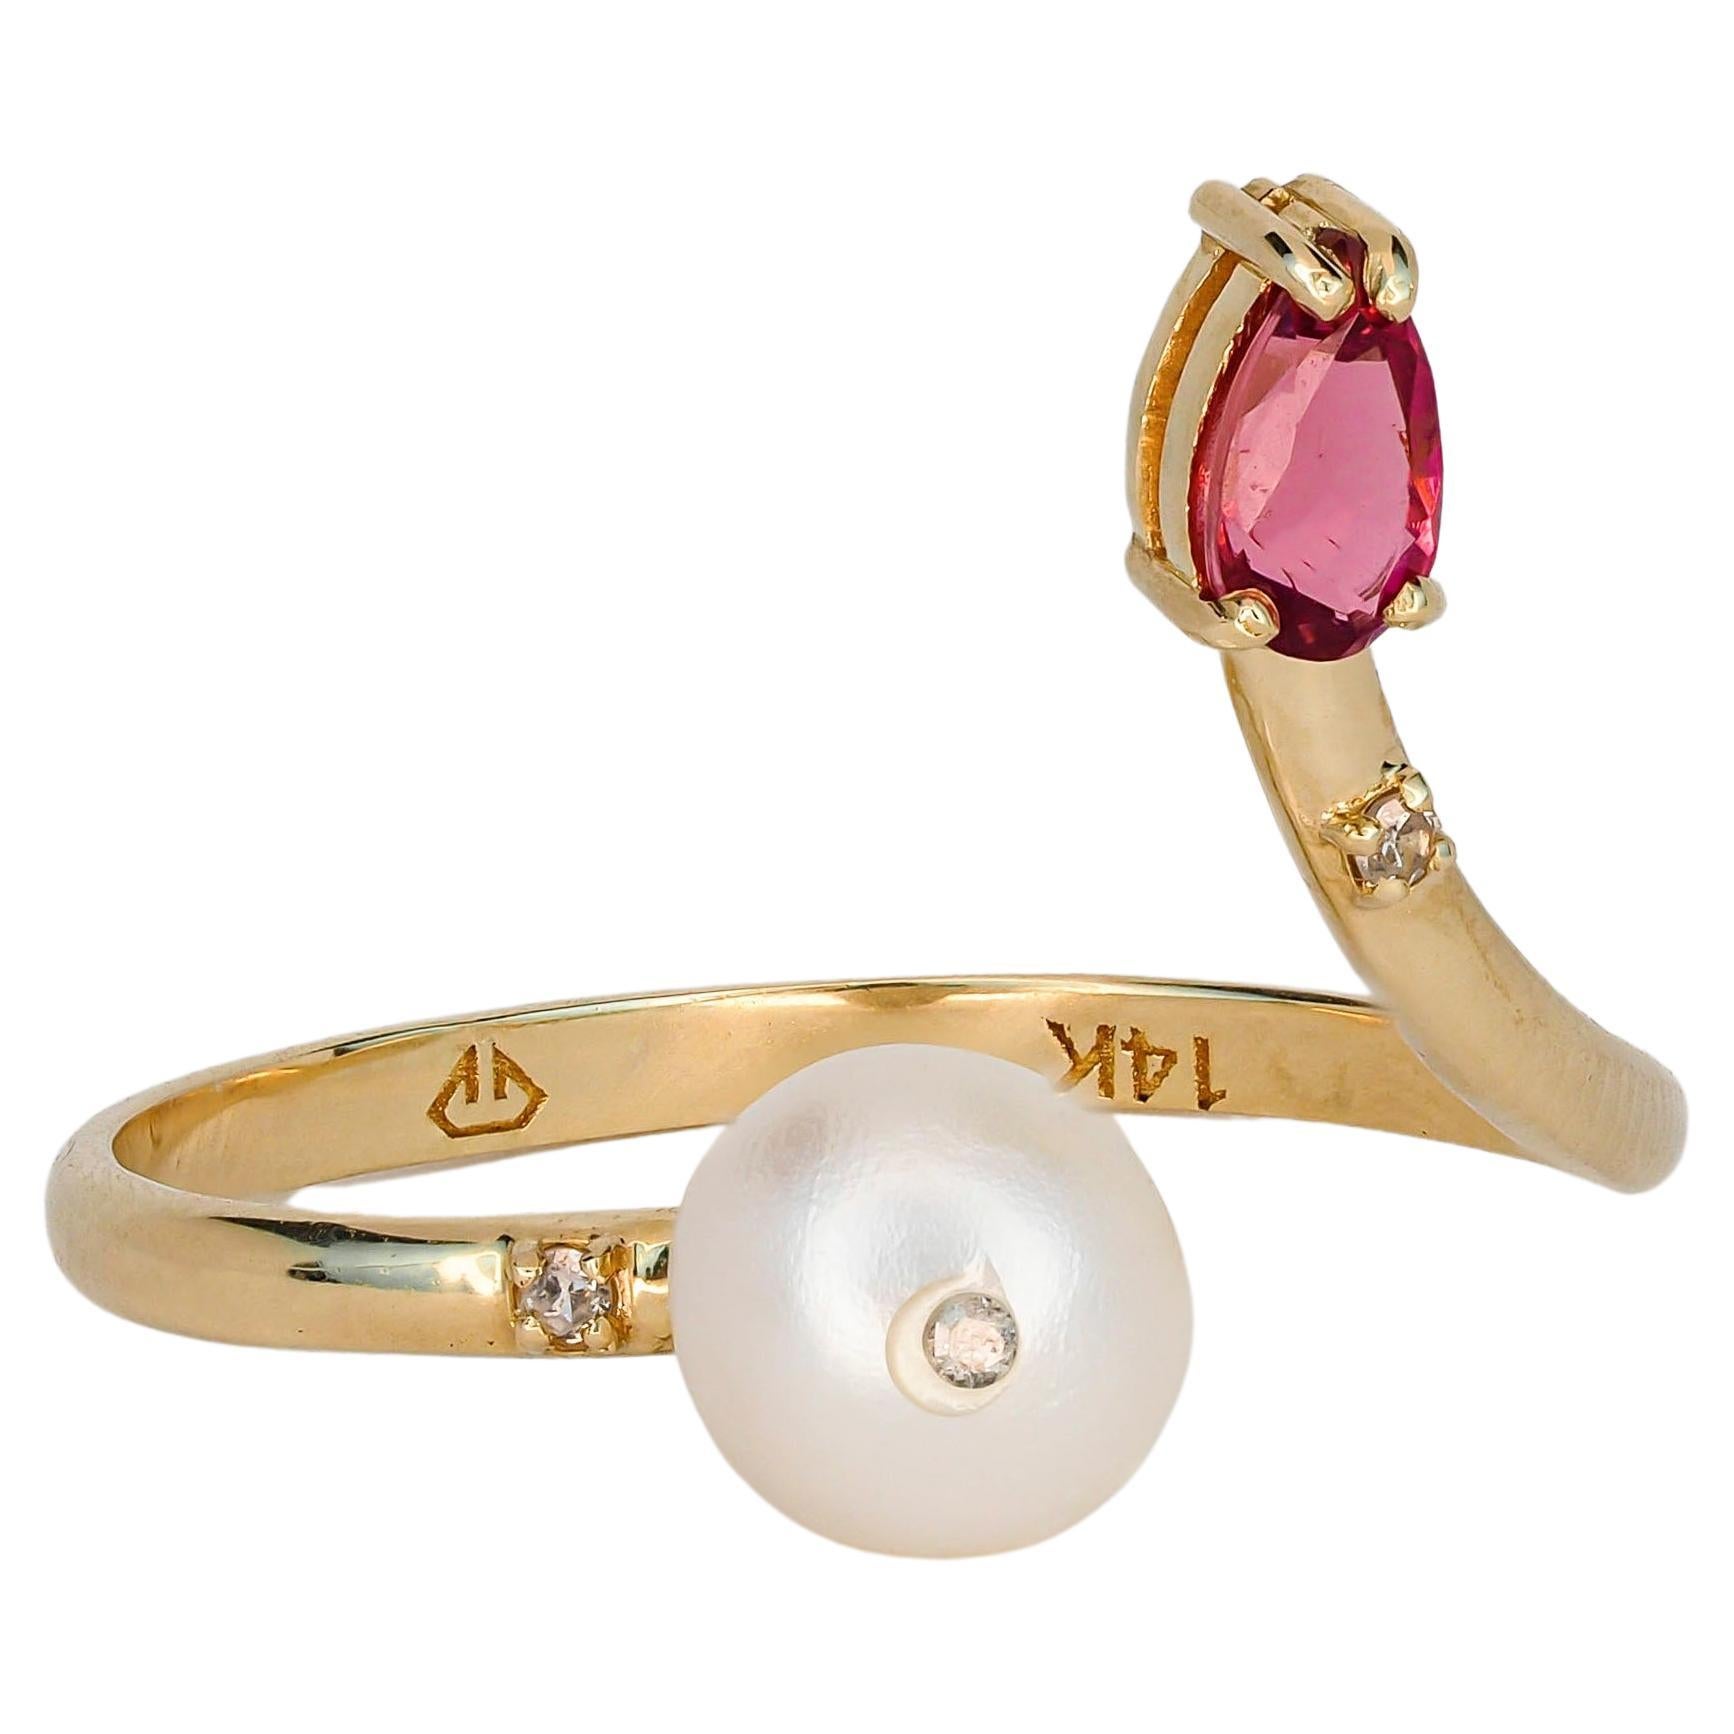 For Sale:  14k Gold Ring with Pearl, Garnet and Diamonds